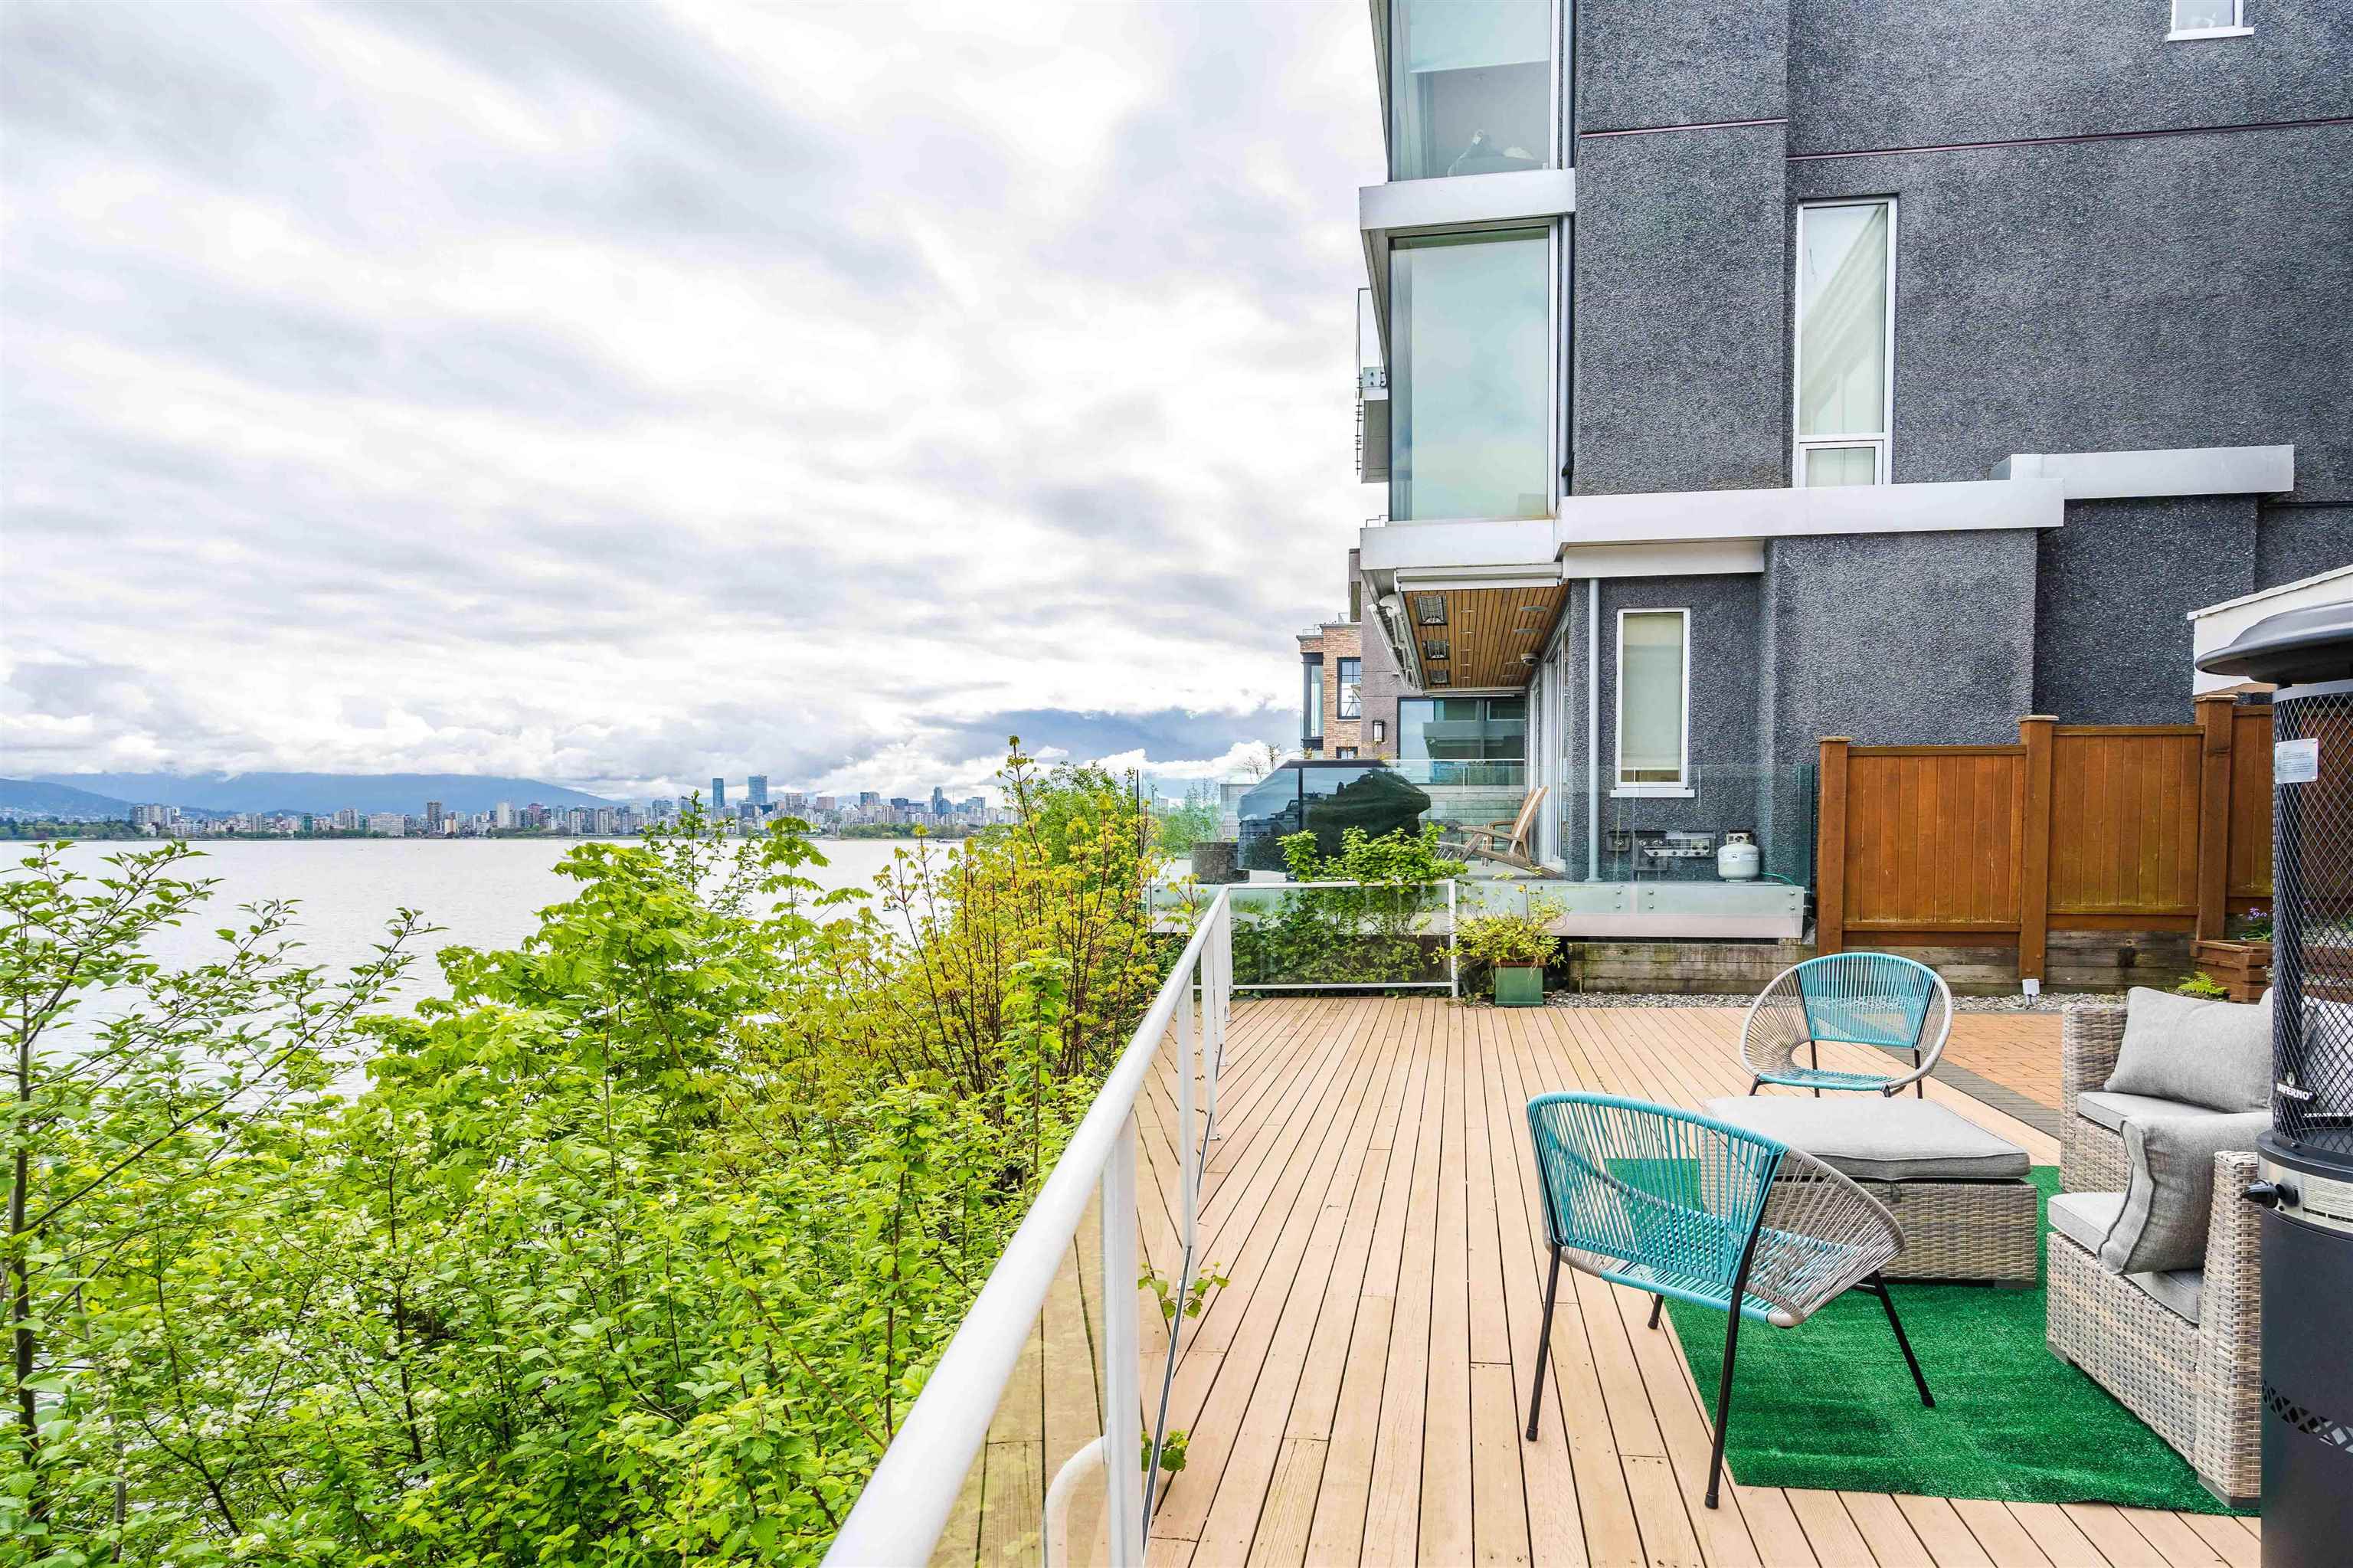 Listing image of 3341 POINT GREY ROAD